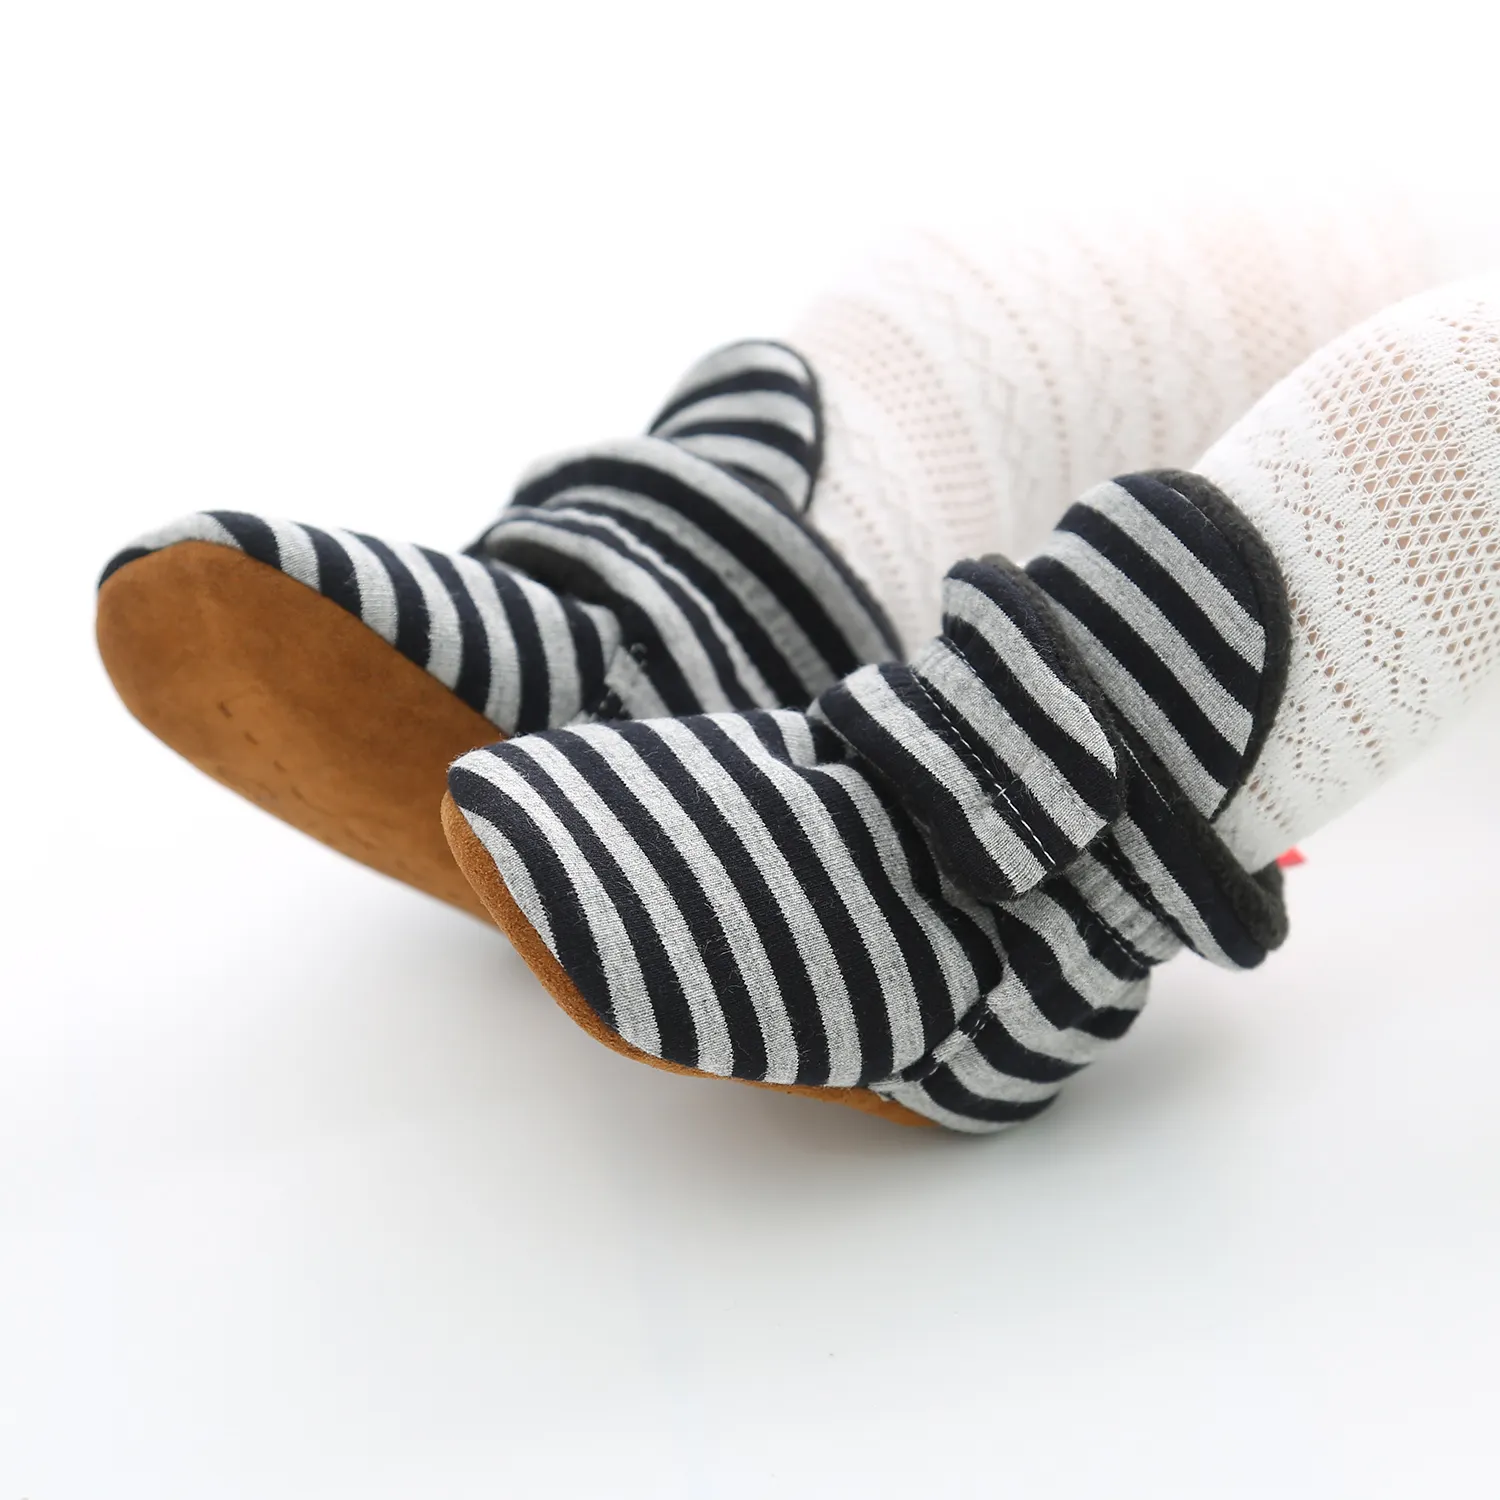 Newborn Baby Shoes Striped Knitted Fabric 0-1 years Old Infant Soft Sole Shoes winter Warm Boots for Toddler